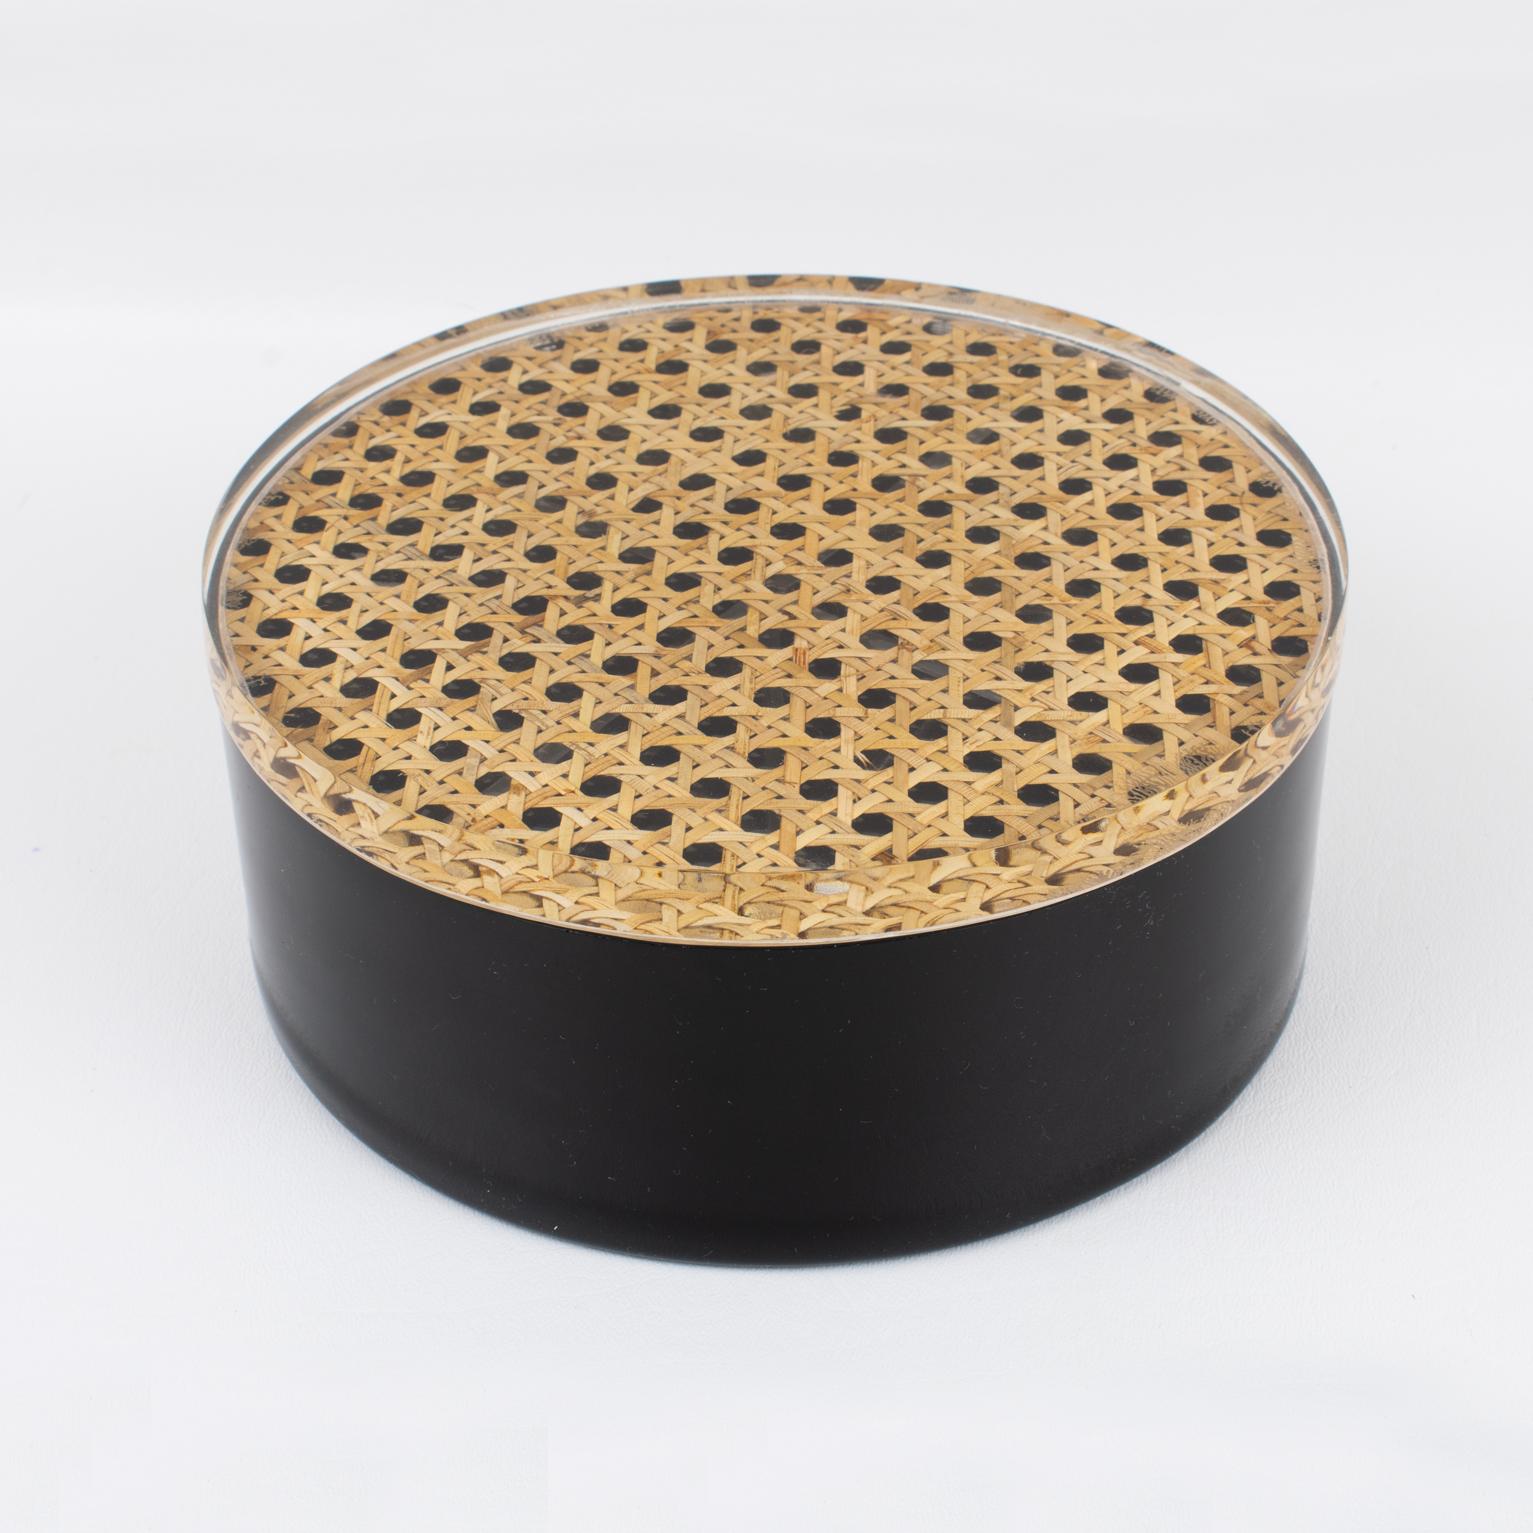 Black Lucite and Rattan Box, Italy 1970s For Sale 2